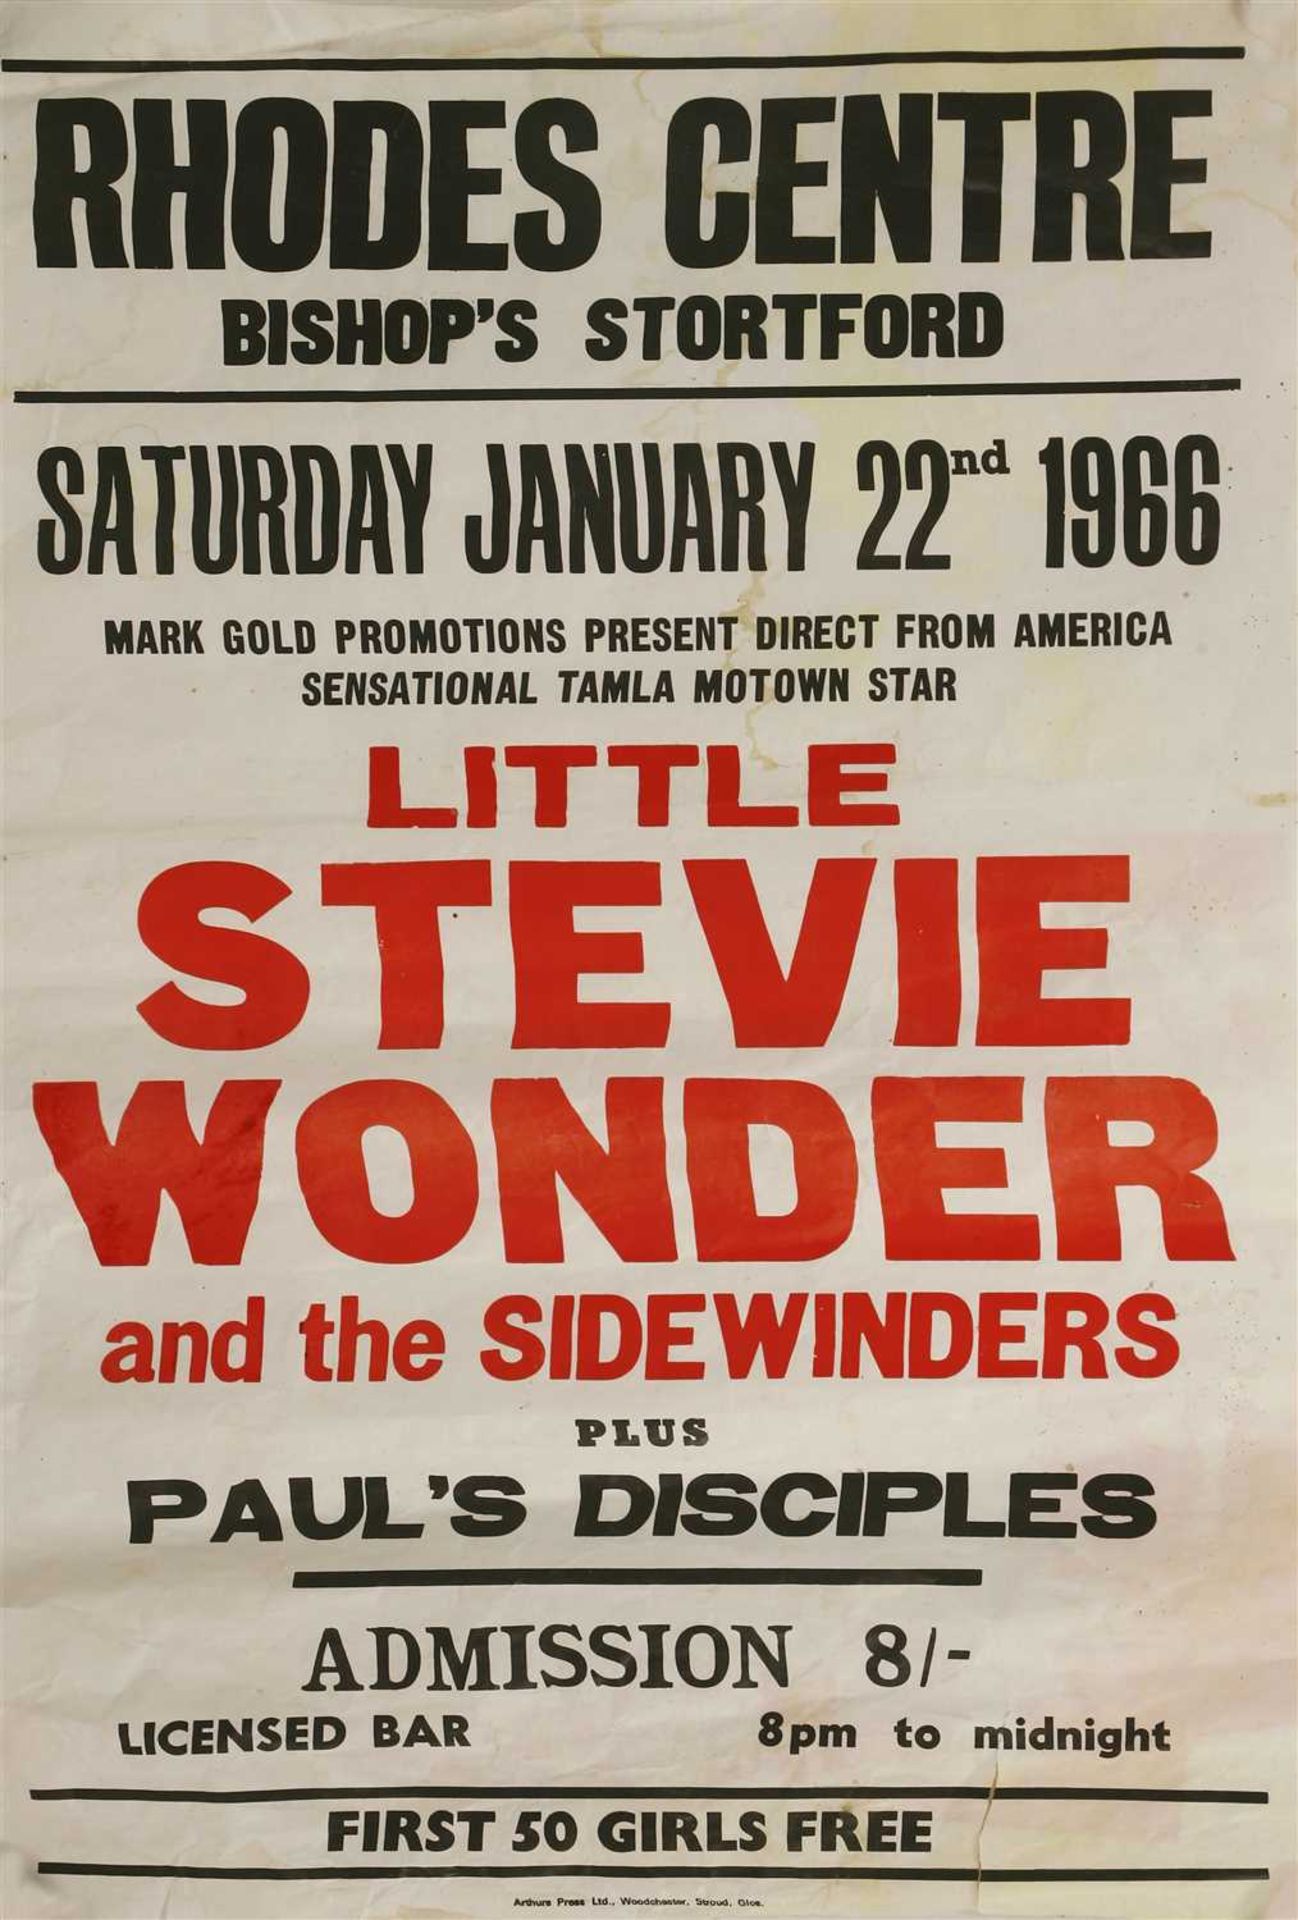 A Little Stevie Wonder and the Sidewinders concert poster